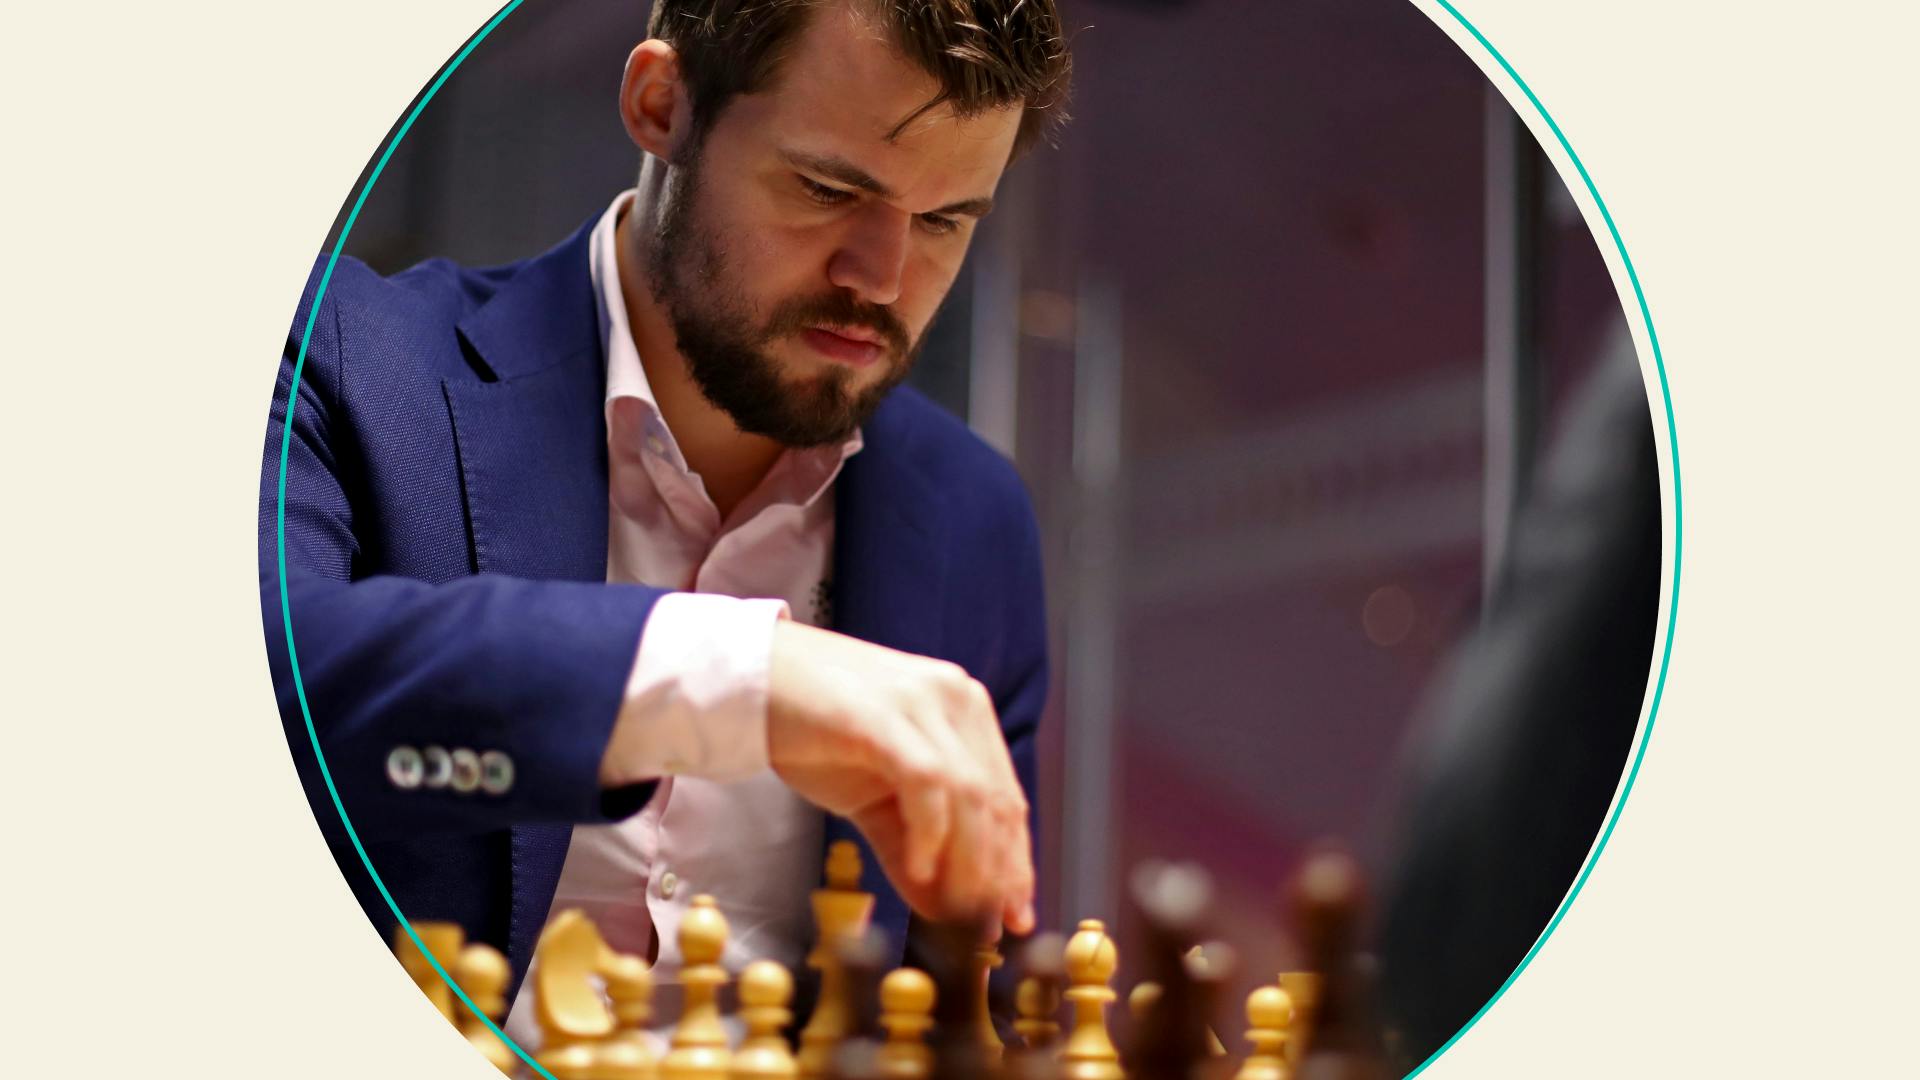 Magnus Carlsen of Norway competes against Daniil Dubov of Russia during the 82nd Tata Steel Chess Tournament held at the home of PSV football club, Philips Stadion on January 16, 2020